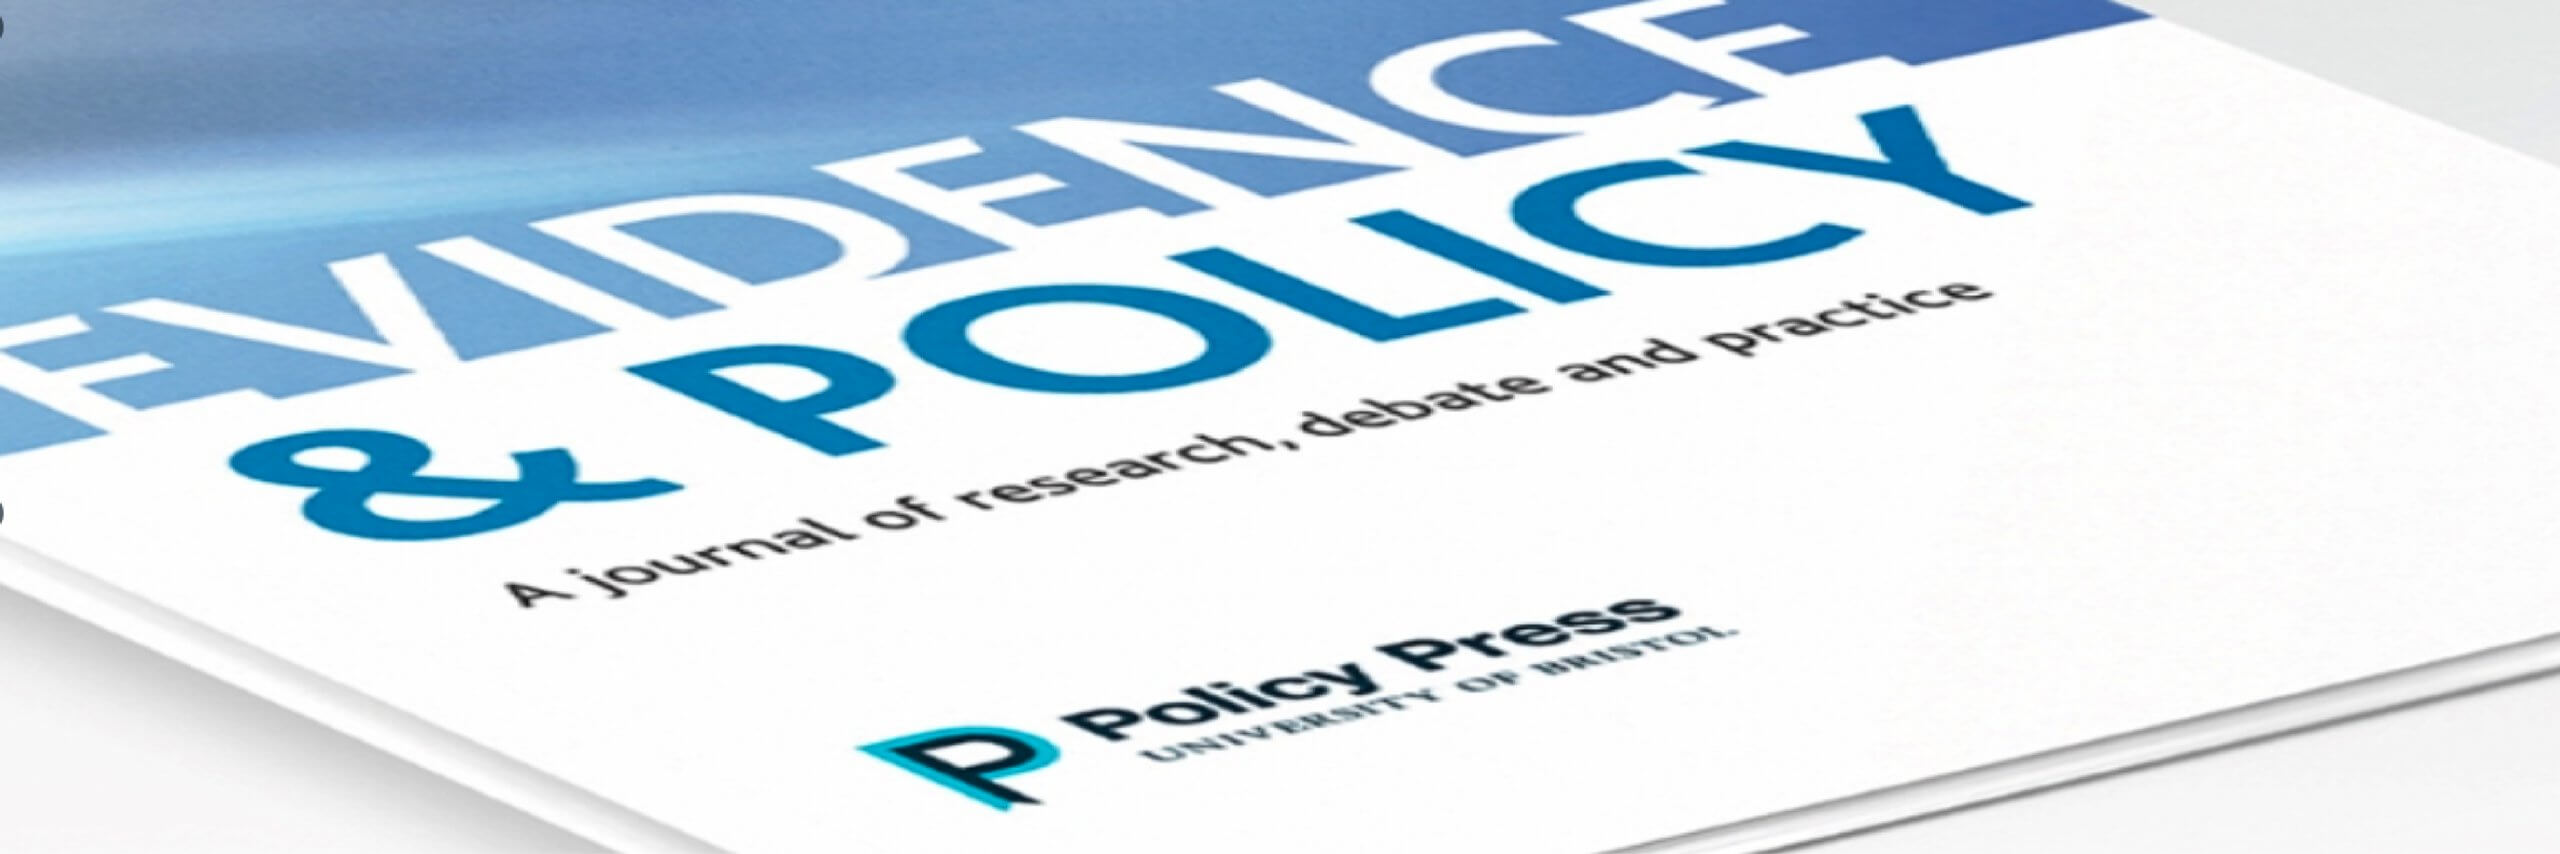 Researcher blog: Guest editing a Special Issue for Evidence & Policy during COVID